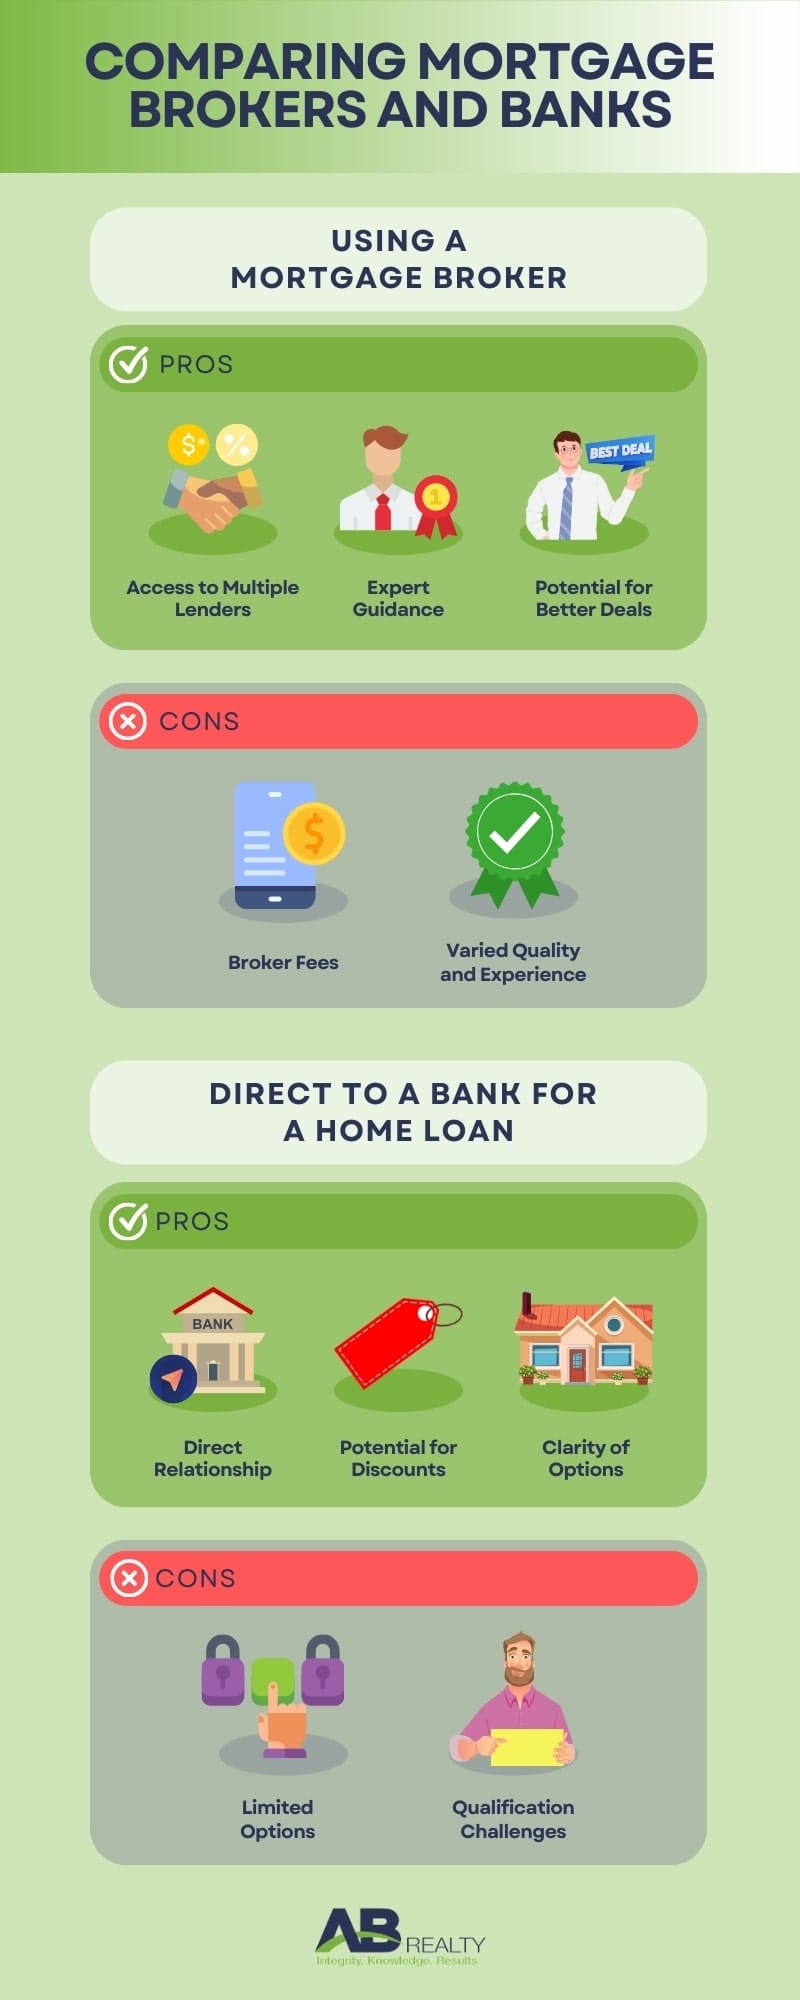 Pros and Cons of using a Mortgage Broker Vs Going to the Bank Directly